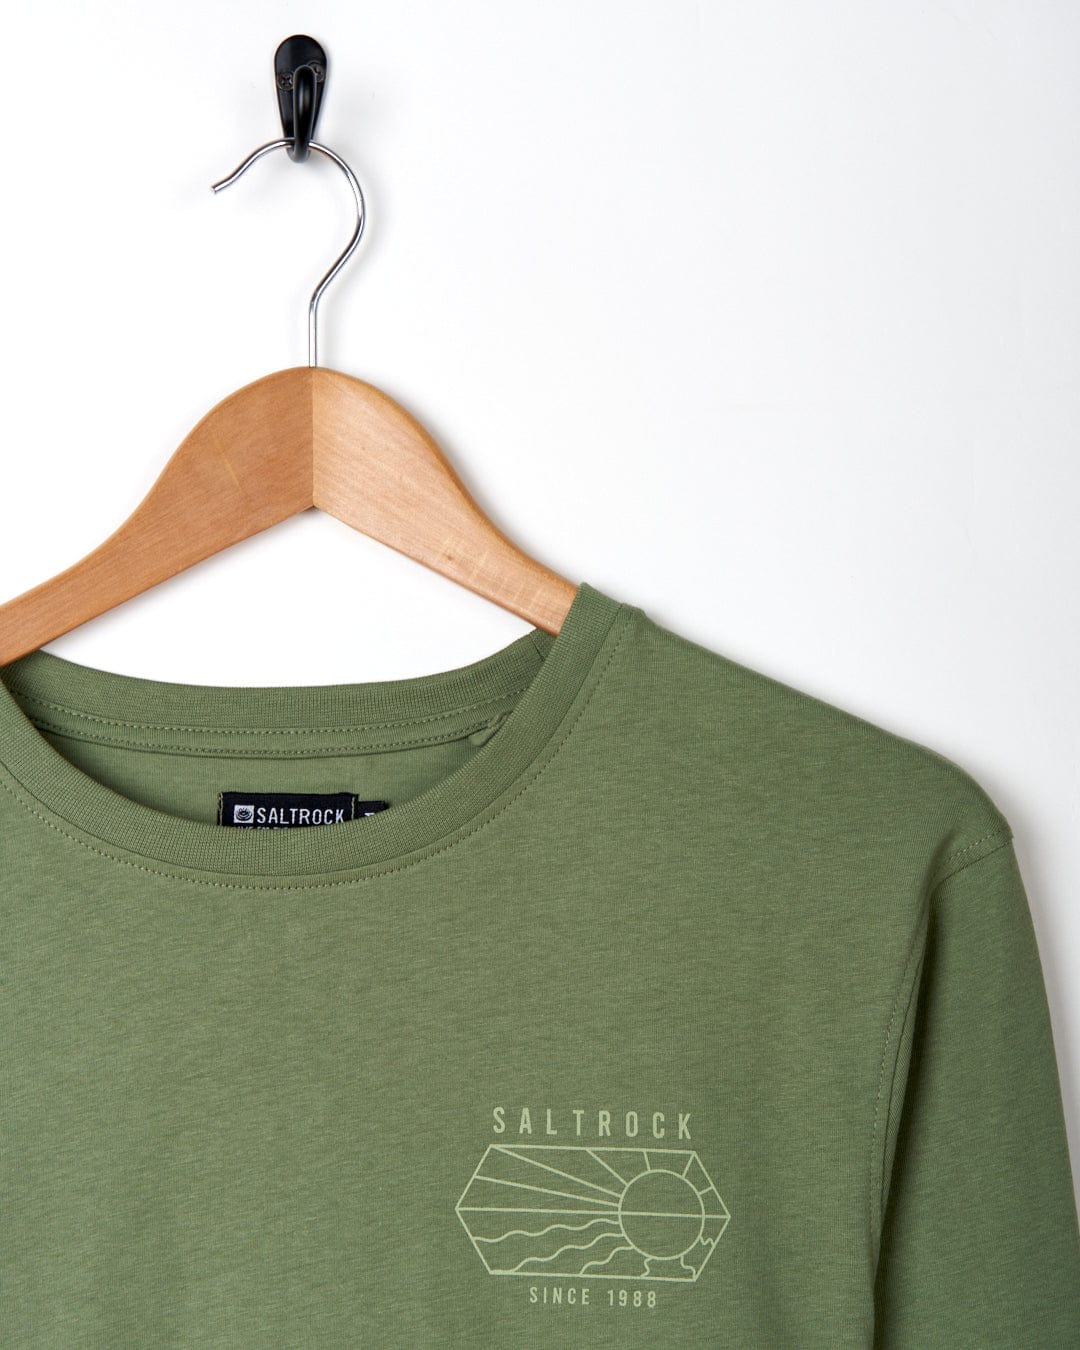 A green long-sleeved Saltrock Vantage Outline t-shirt with a logo on it.